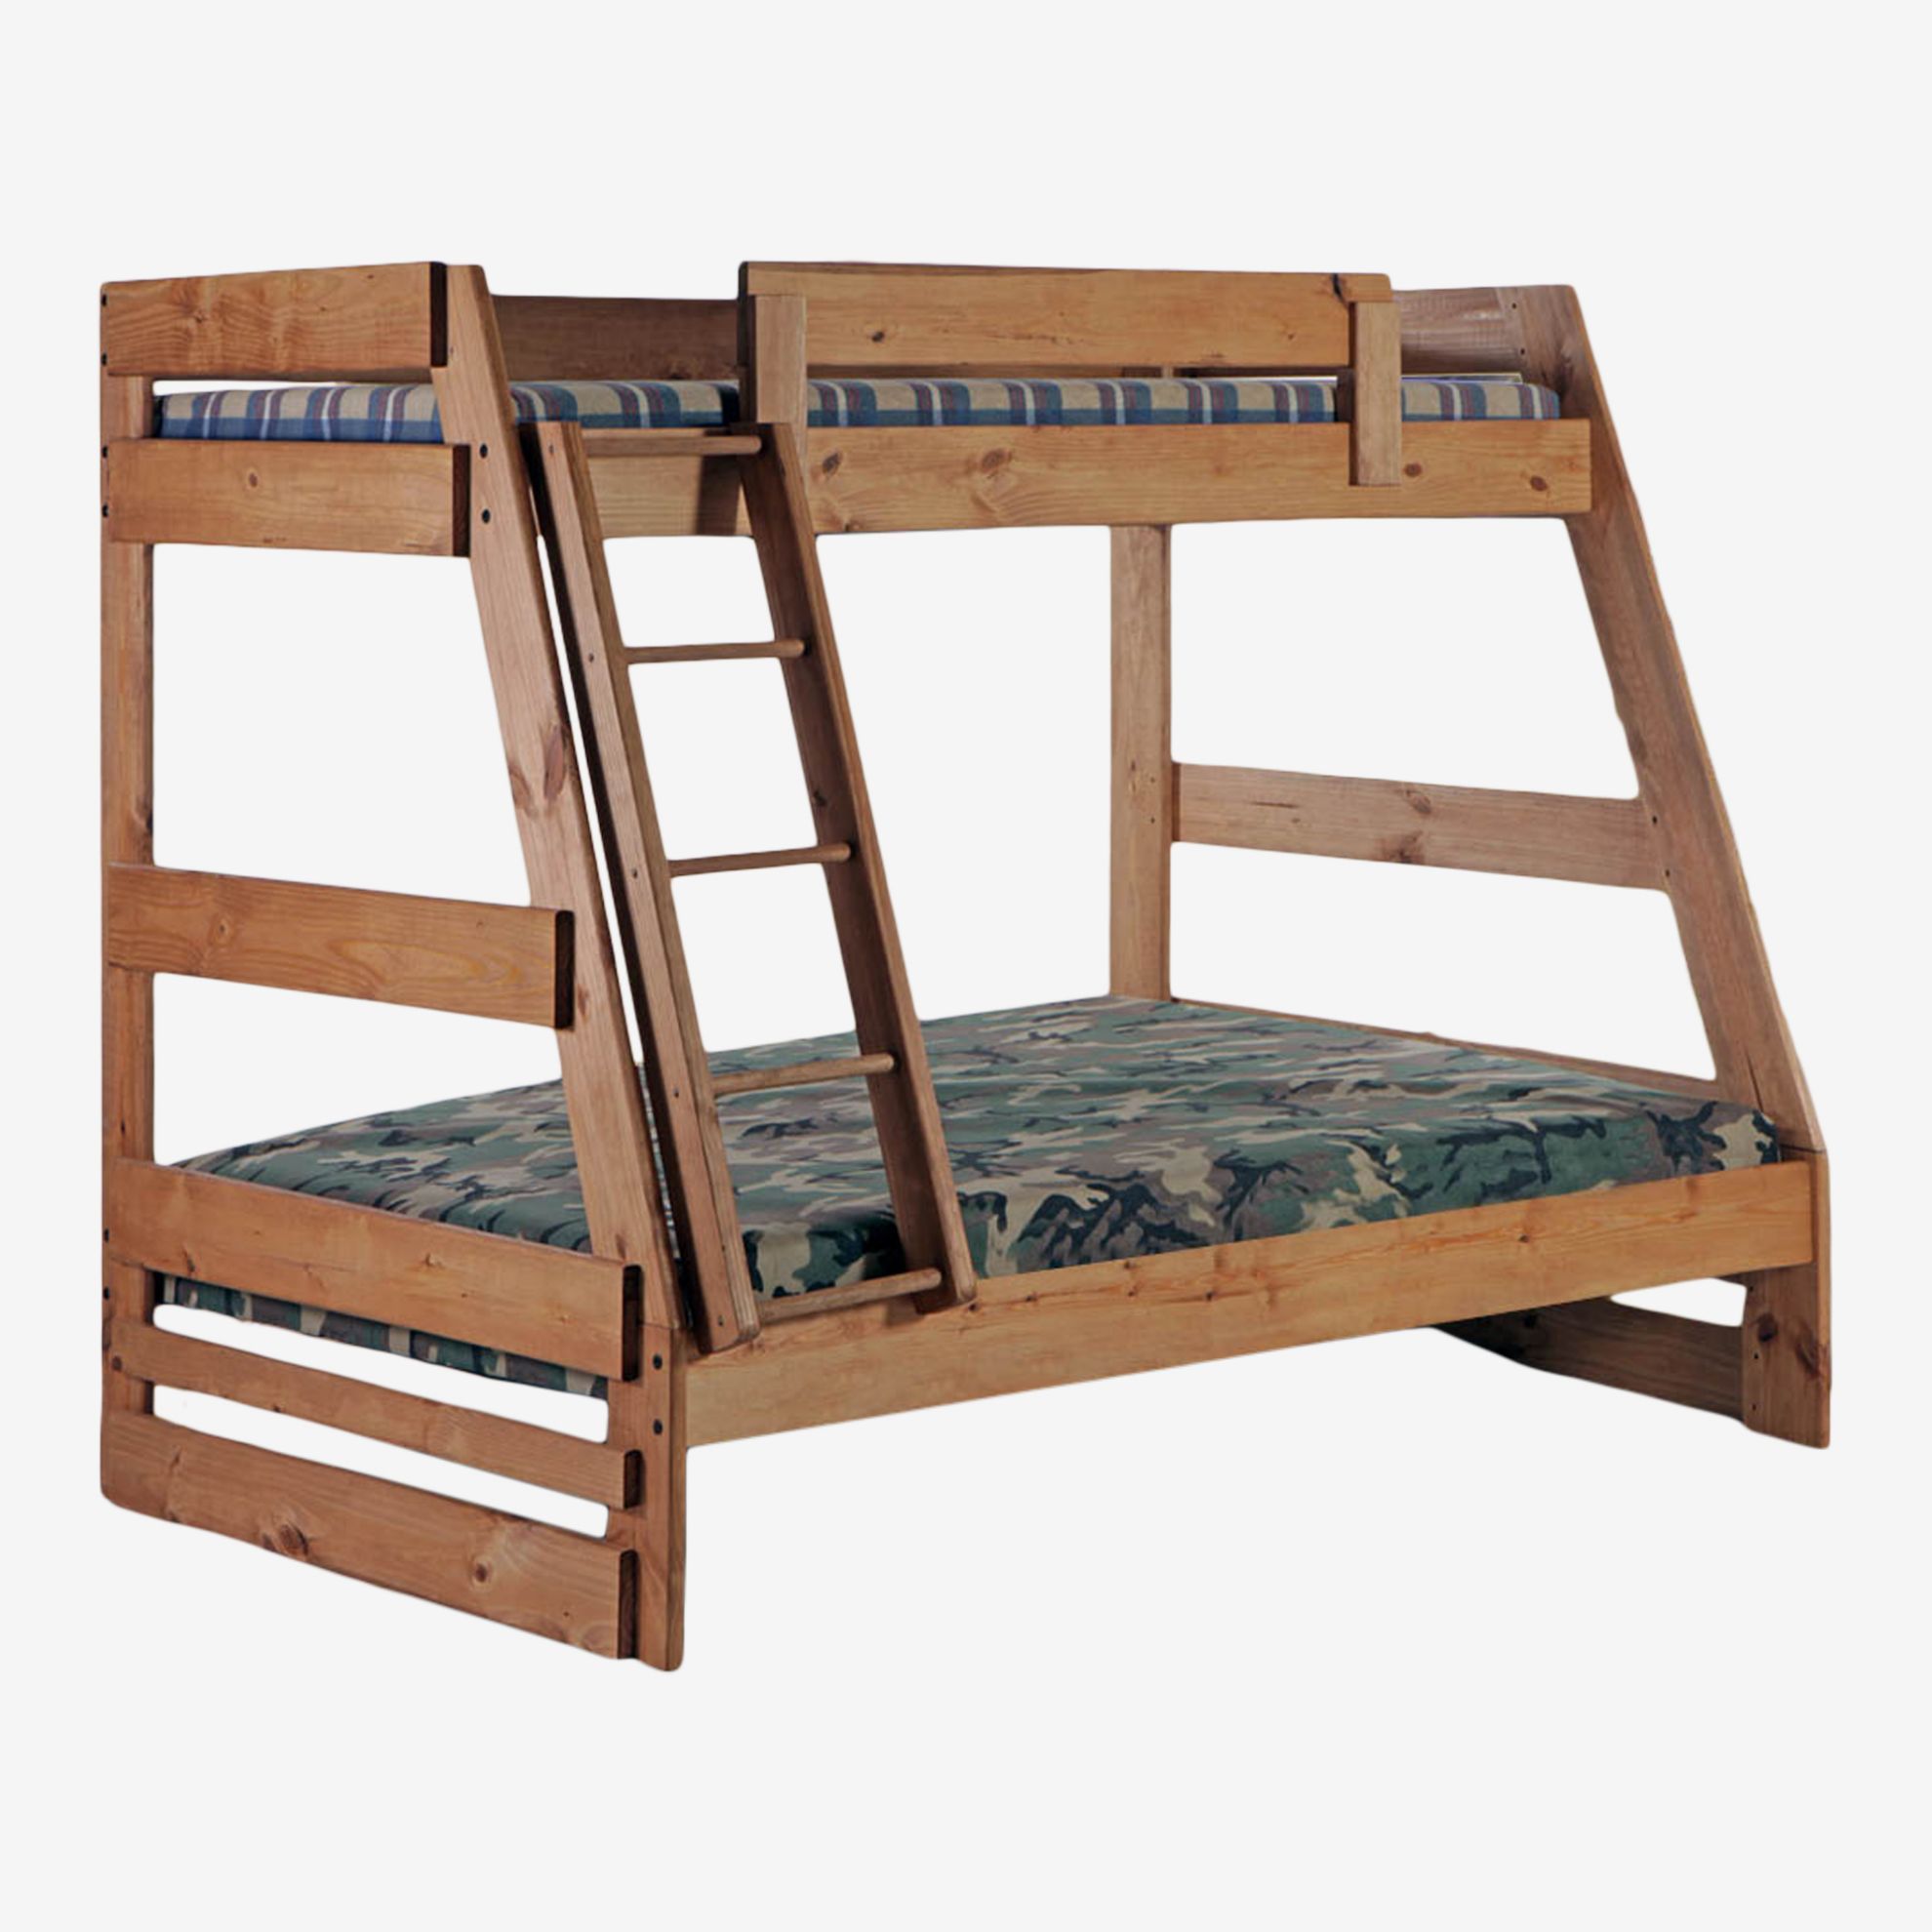 A Frame Twin over Full Bunk Bed